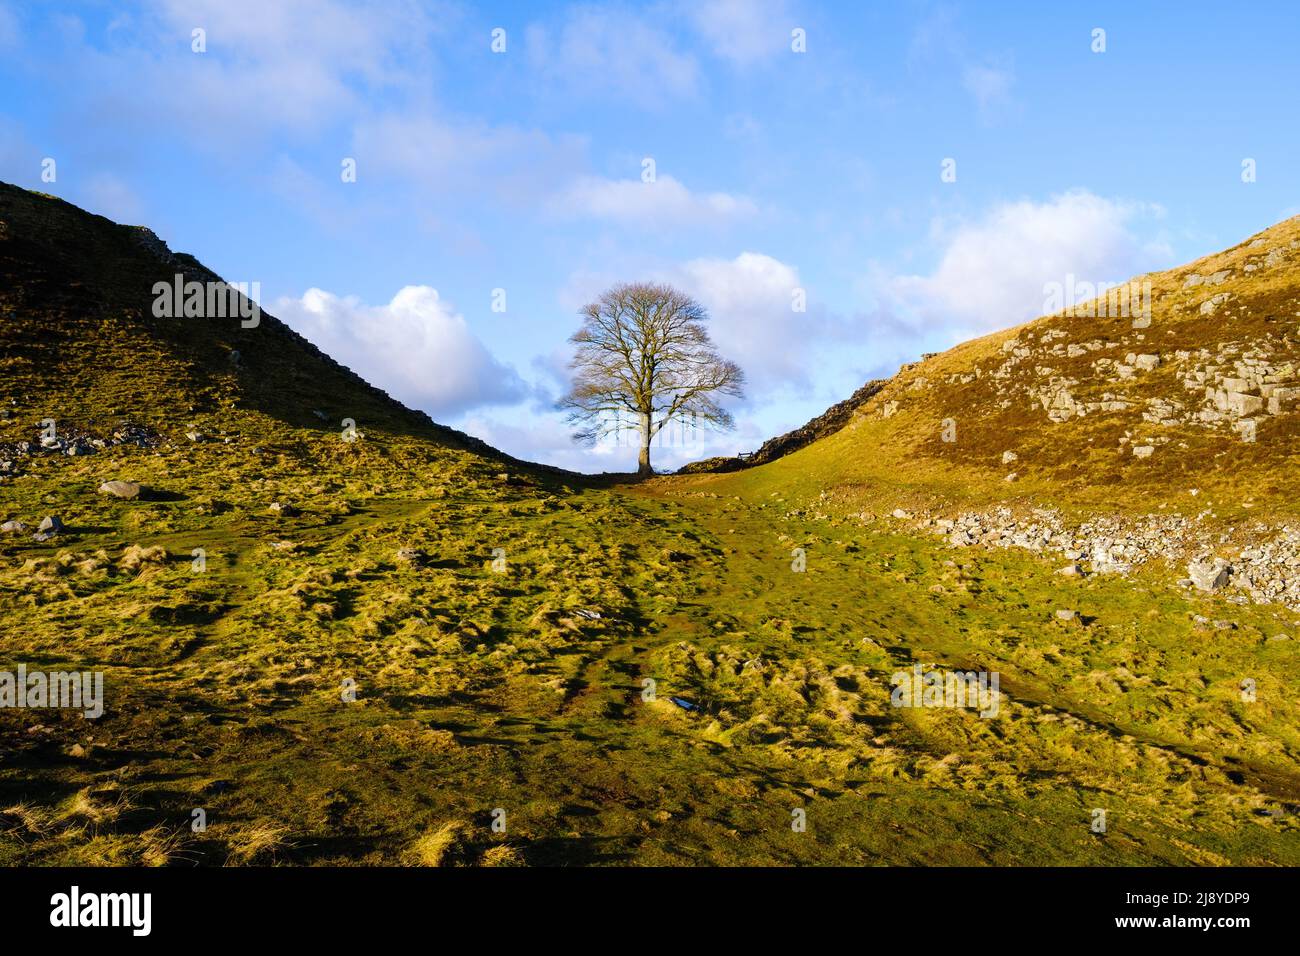 A Sycamore tree in a dip next to Hadrians Wall in Northumberland, known as Sycamore Gap. Stock Photo